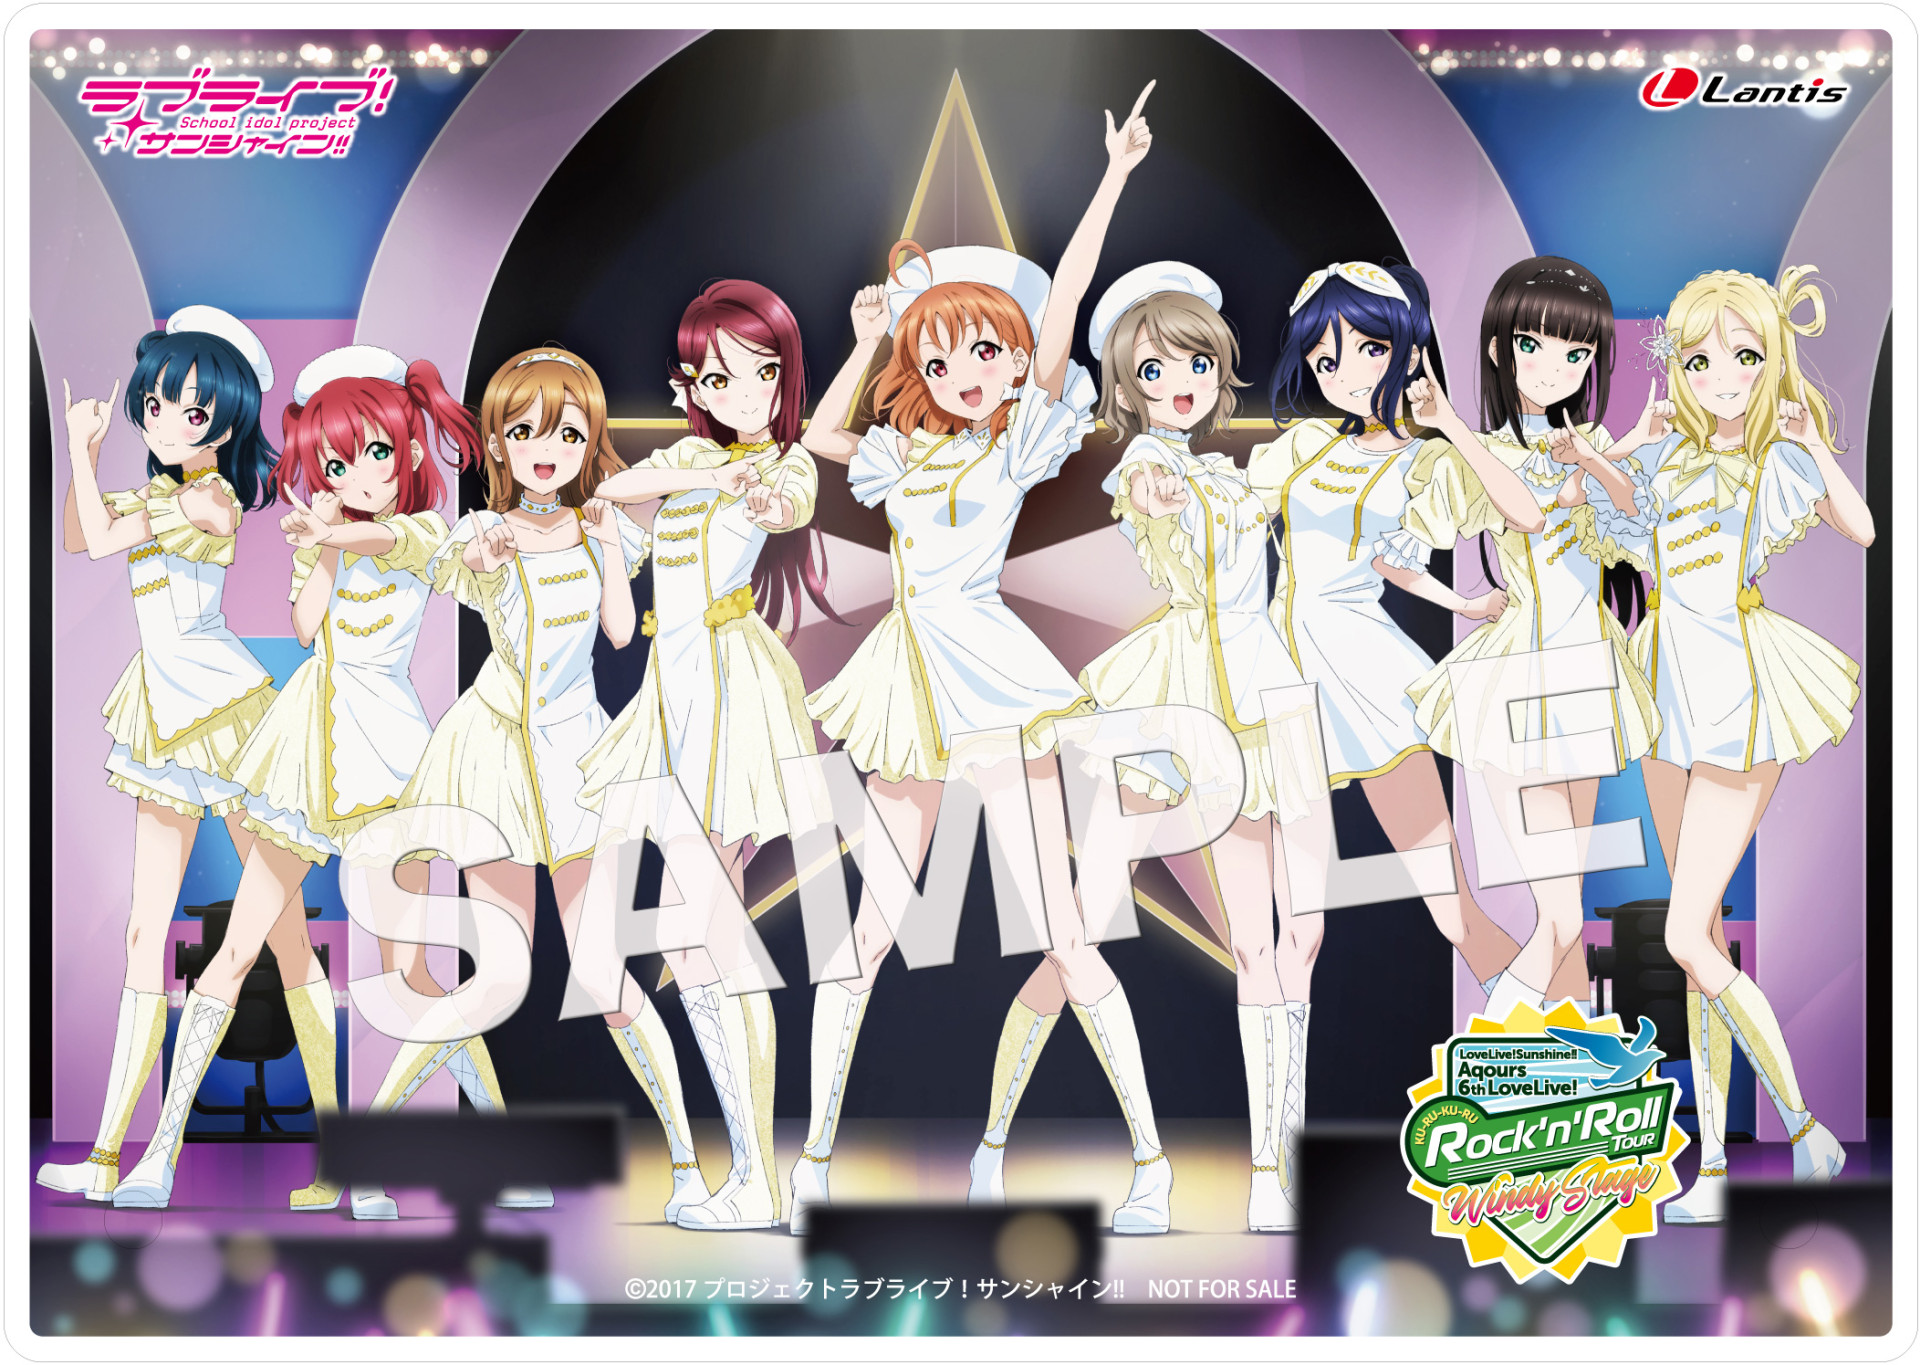 【BDBOX】Aqours 6th LoveLive WINDYSTAGE